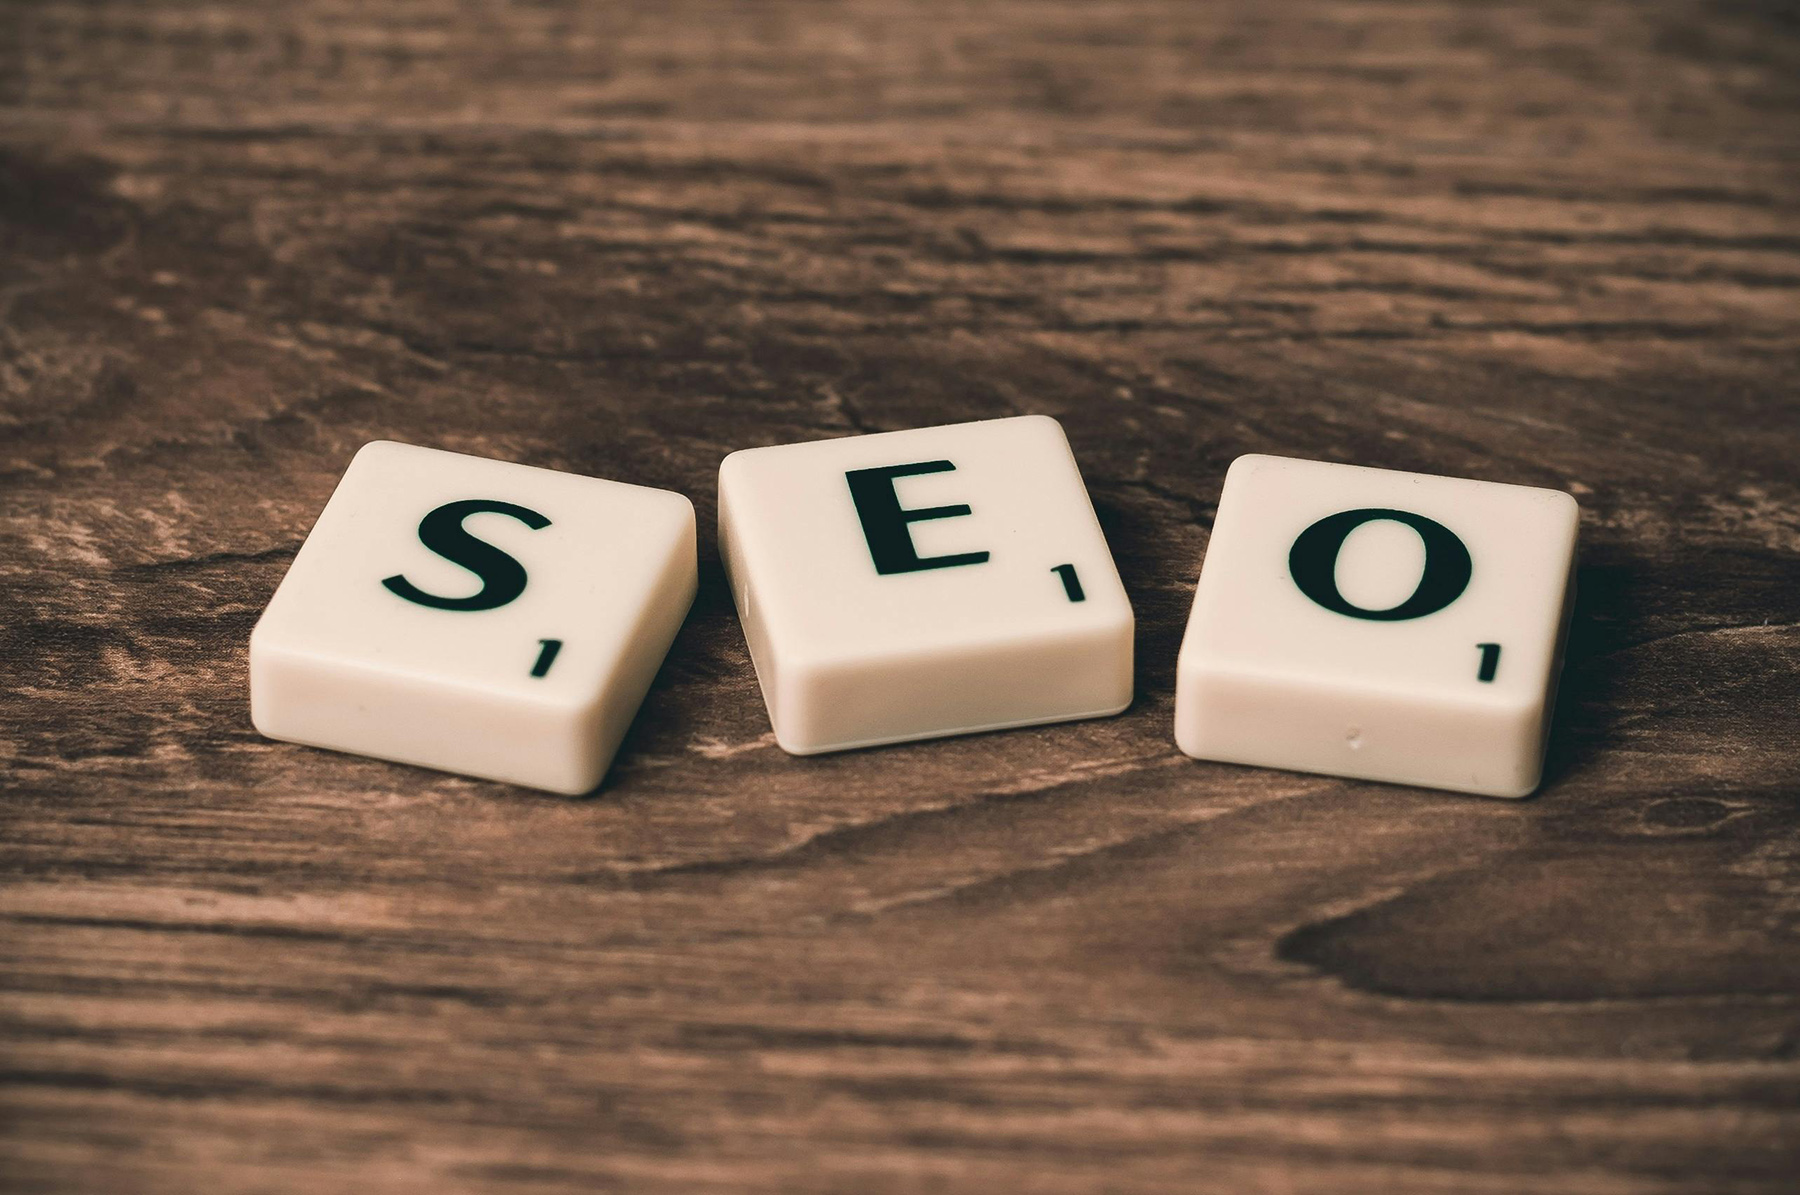 Search Engine Optimization: A Guide for Short-Term Rental Property Managers and Hosts